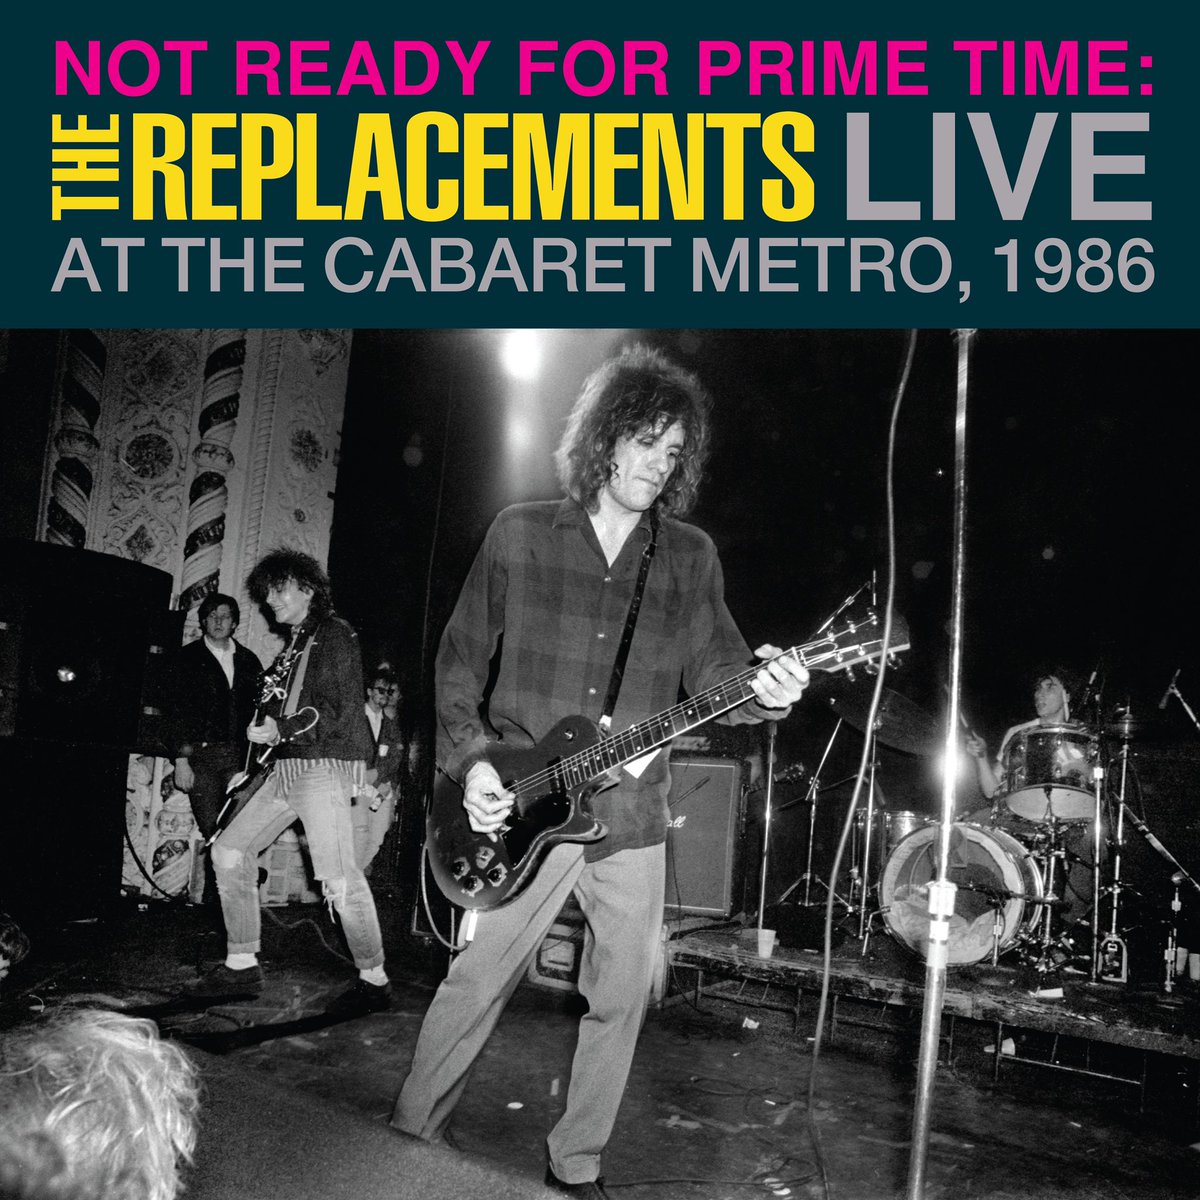 Replacements fans! Tomorrow for Record Store Day we release “NOT READY FOR PRIME TIME: LIVE AT THE CABARET METRO, 1986.” Taken from the “Tim: Let It Bleed Edition” box, this blistering concert features 28 ‘Mats classics, rarities & covers out as a limited edition 2-LP vinyl set.